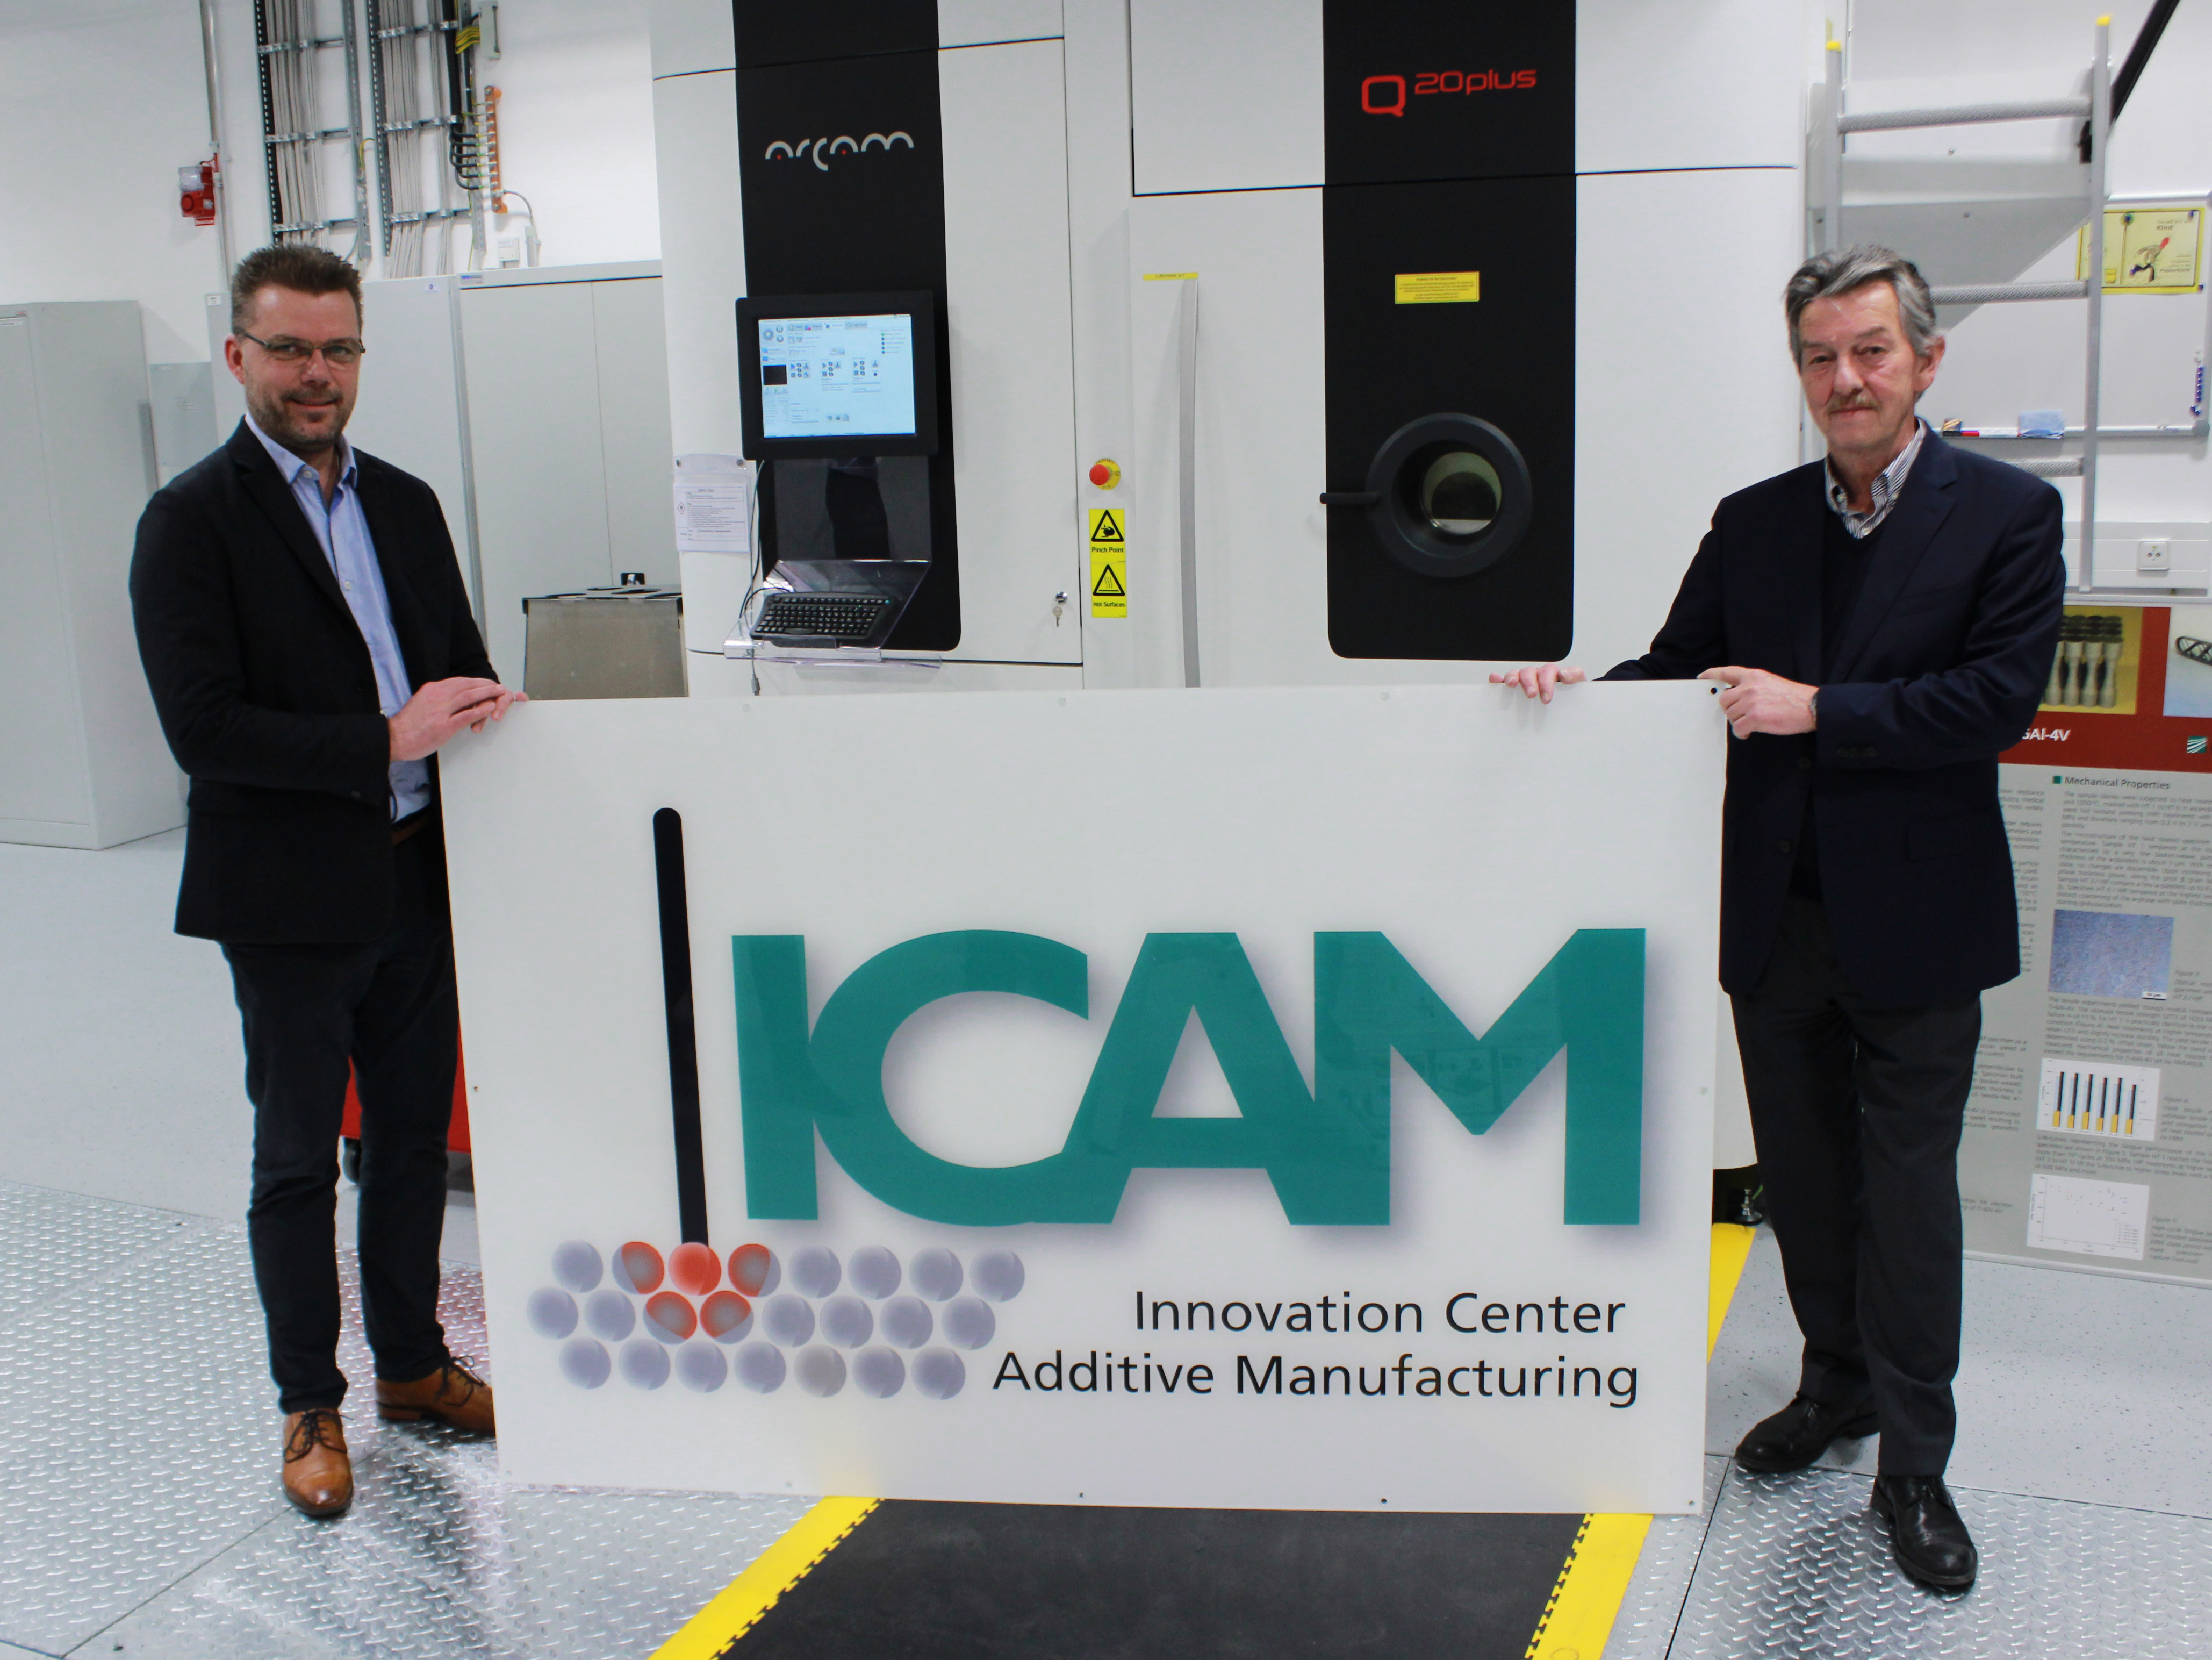 Dr. Thomas Weißgärber (left) and Prof. Dr. Bernd Kieback (right) at the inauguration of the Innovation Center Additive Manufacturing ICAM at Fraunhofer IFAM in Dresden